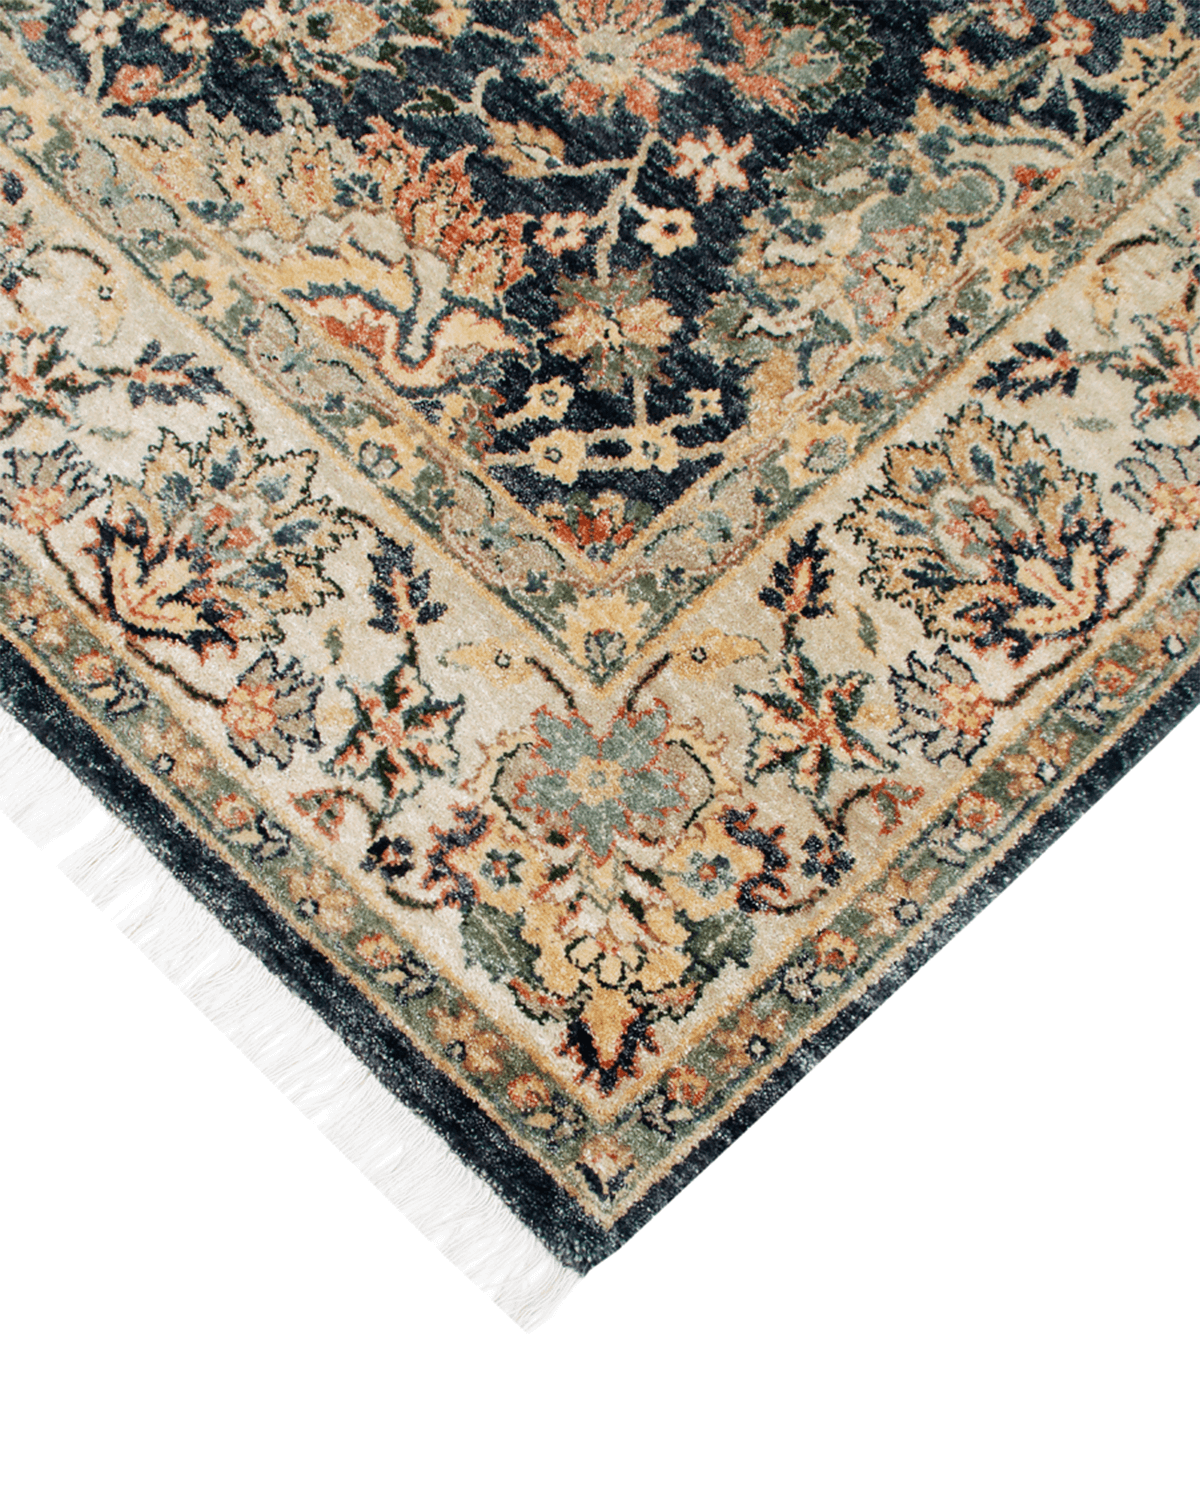 Hand-Knotted Traditional Rug (Agra-89)